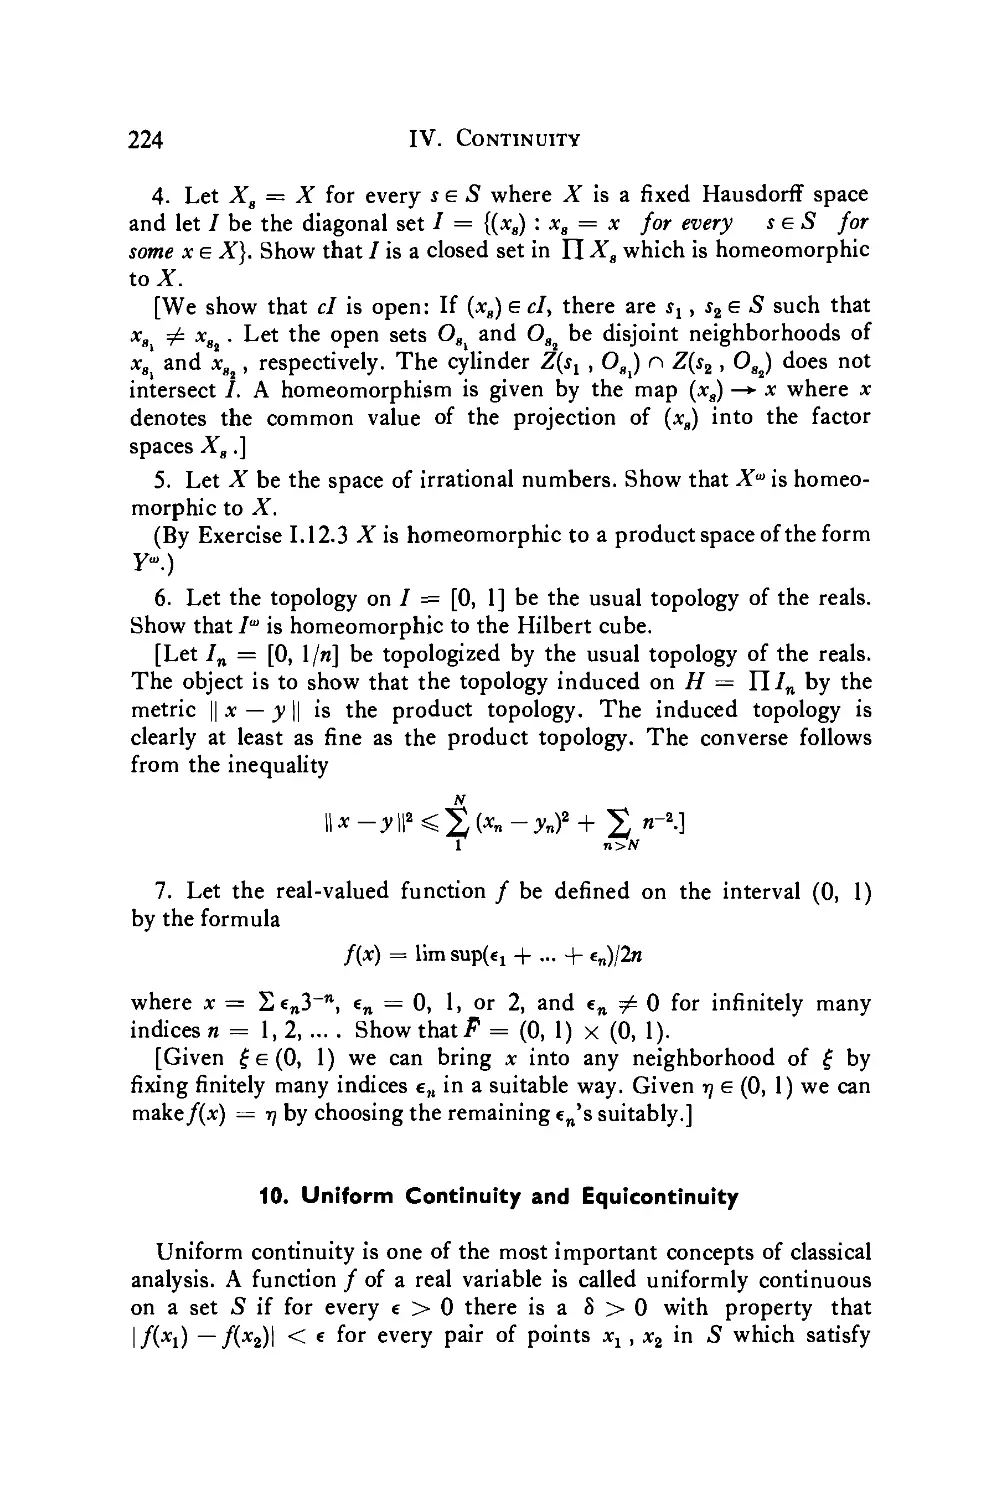 10. Uniform Continuity and Equicontinuity